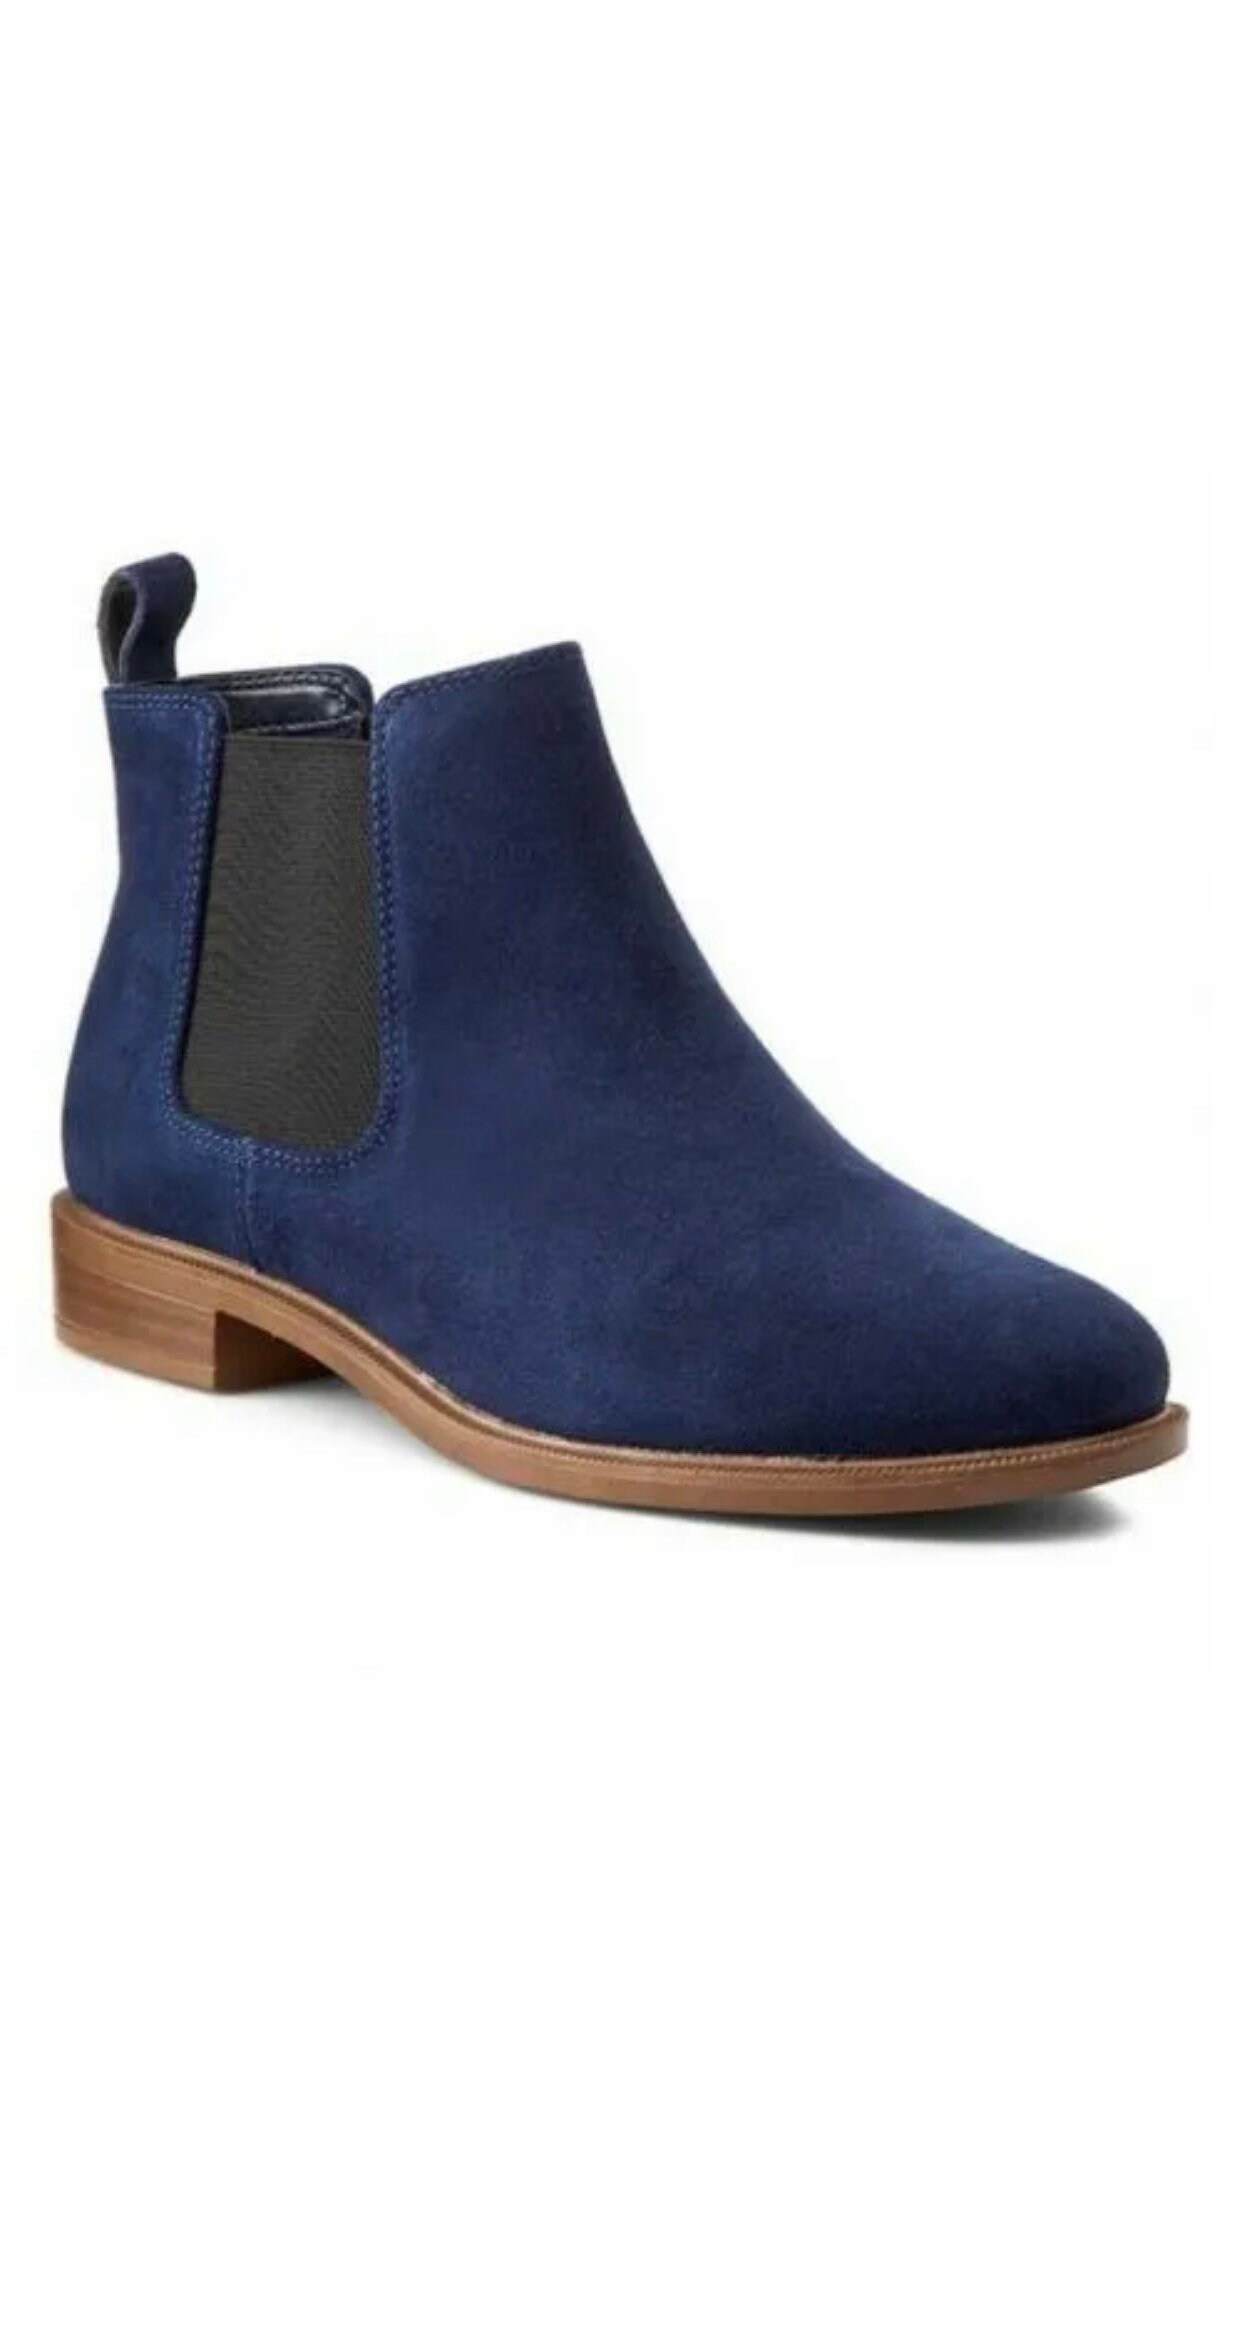 Digital Alacena Resonar New in Box Clarks Ladies Chelsea Ankle Boots TAYLOR Shine Navy - Etsy